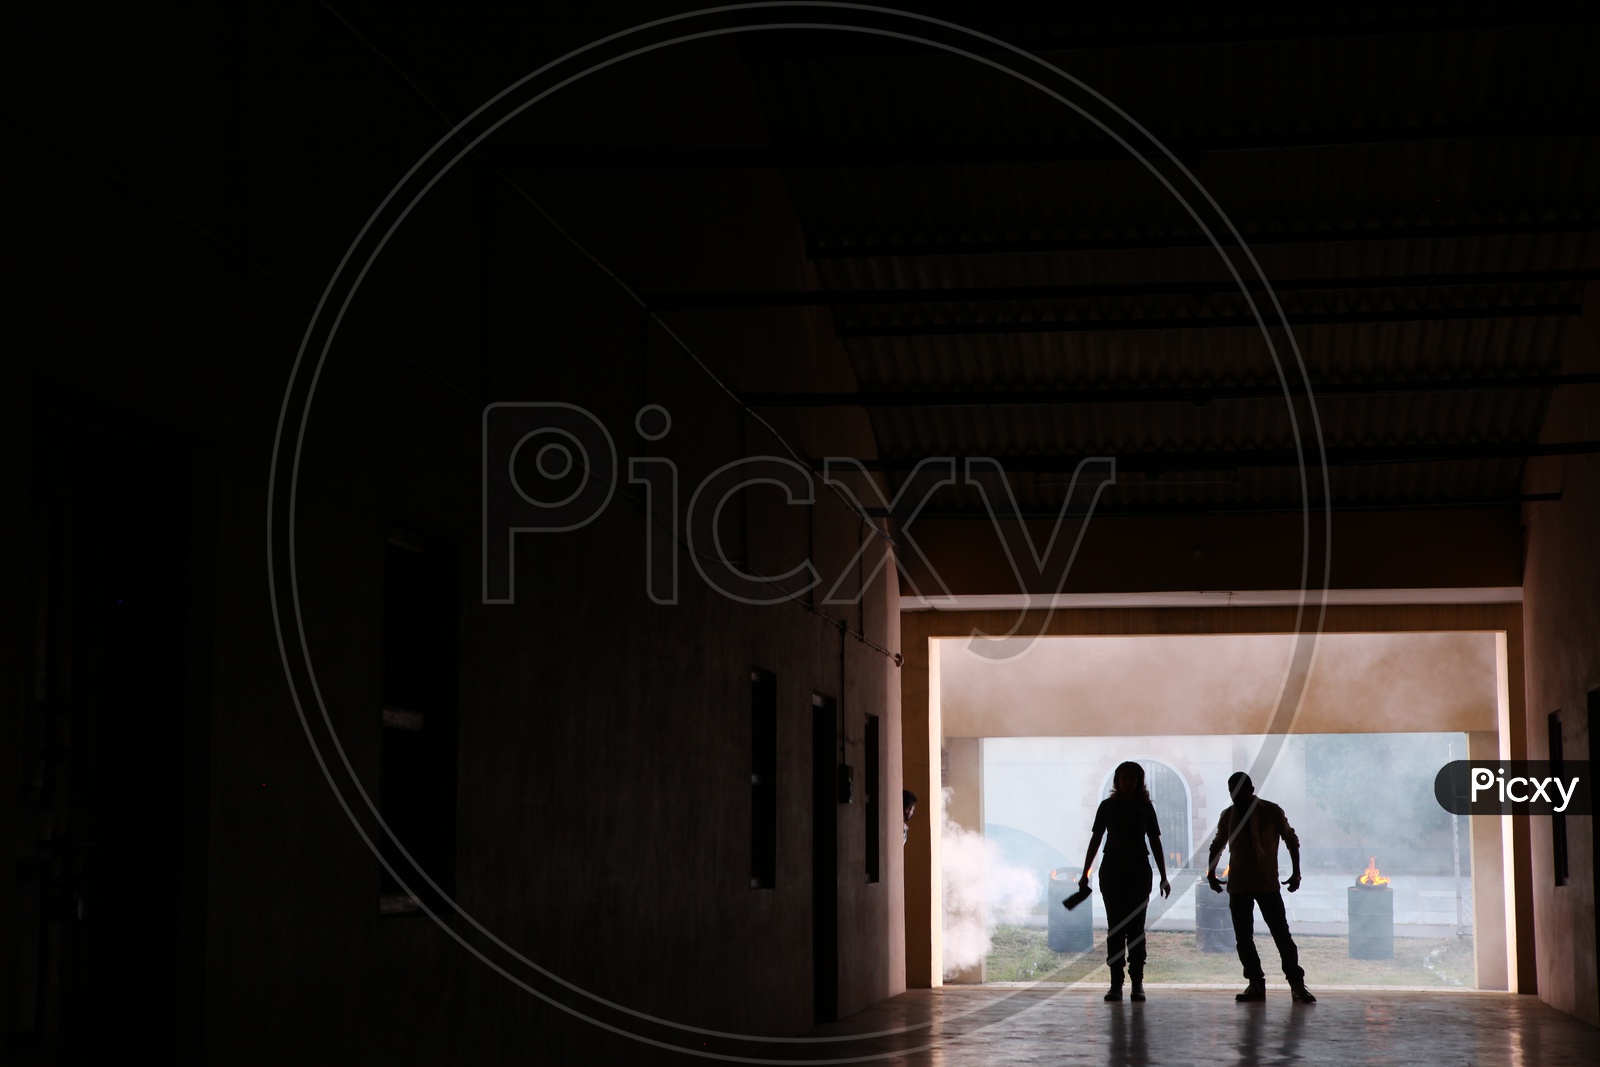 Silhouette Of People in a Corridor